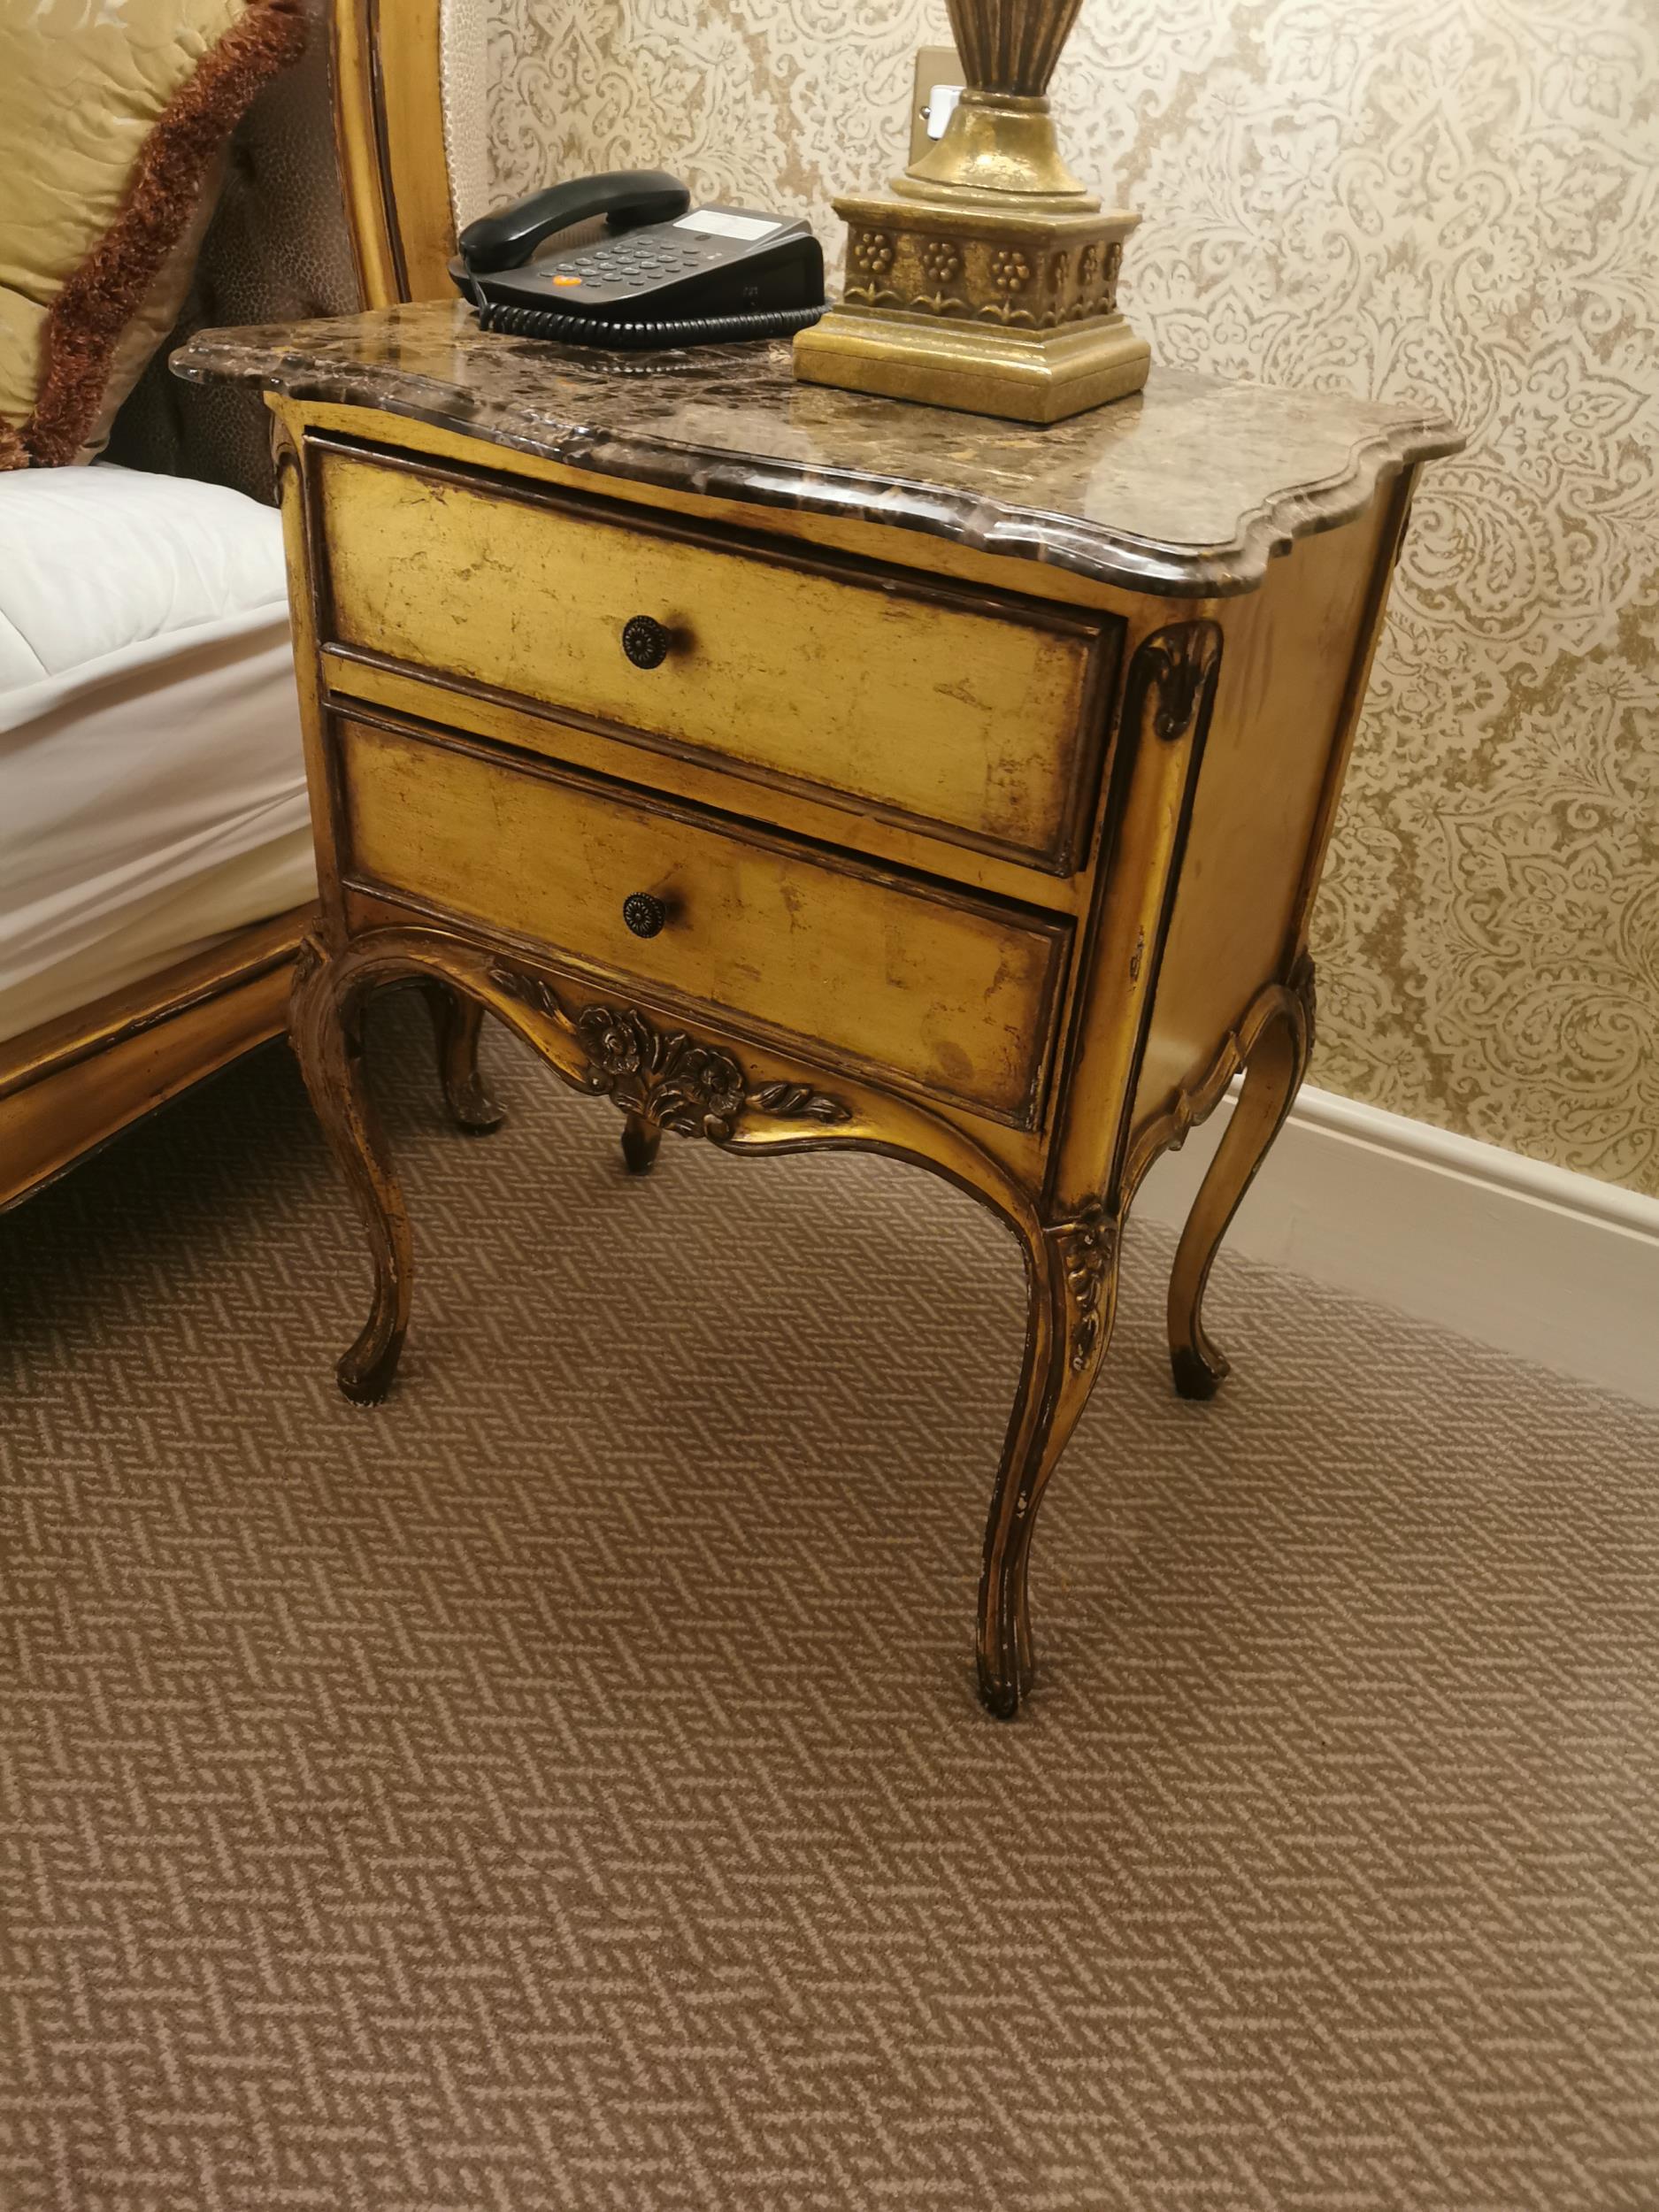 Pair of French giltwood bedside cabinets with marble top {72 cm H x 59 cm W x 40 cm D}. - Image 4 of 4